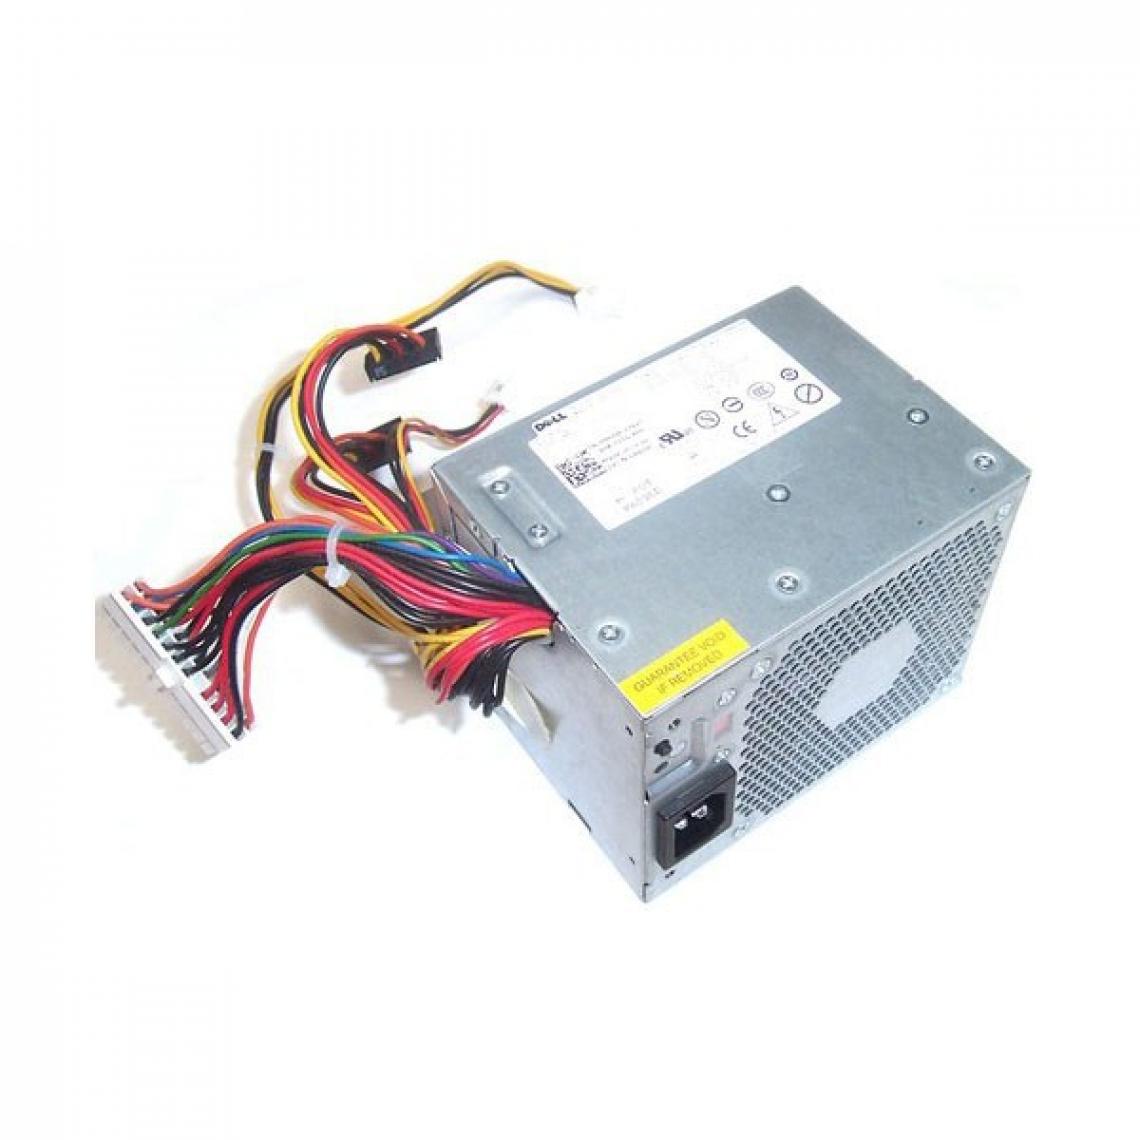 Dell - Alimentation DELL Optiplex 360 380 DT D235PD-00 DPS-235DB 0M618F Power Supply - Alimentation modulaire